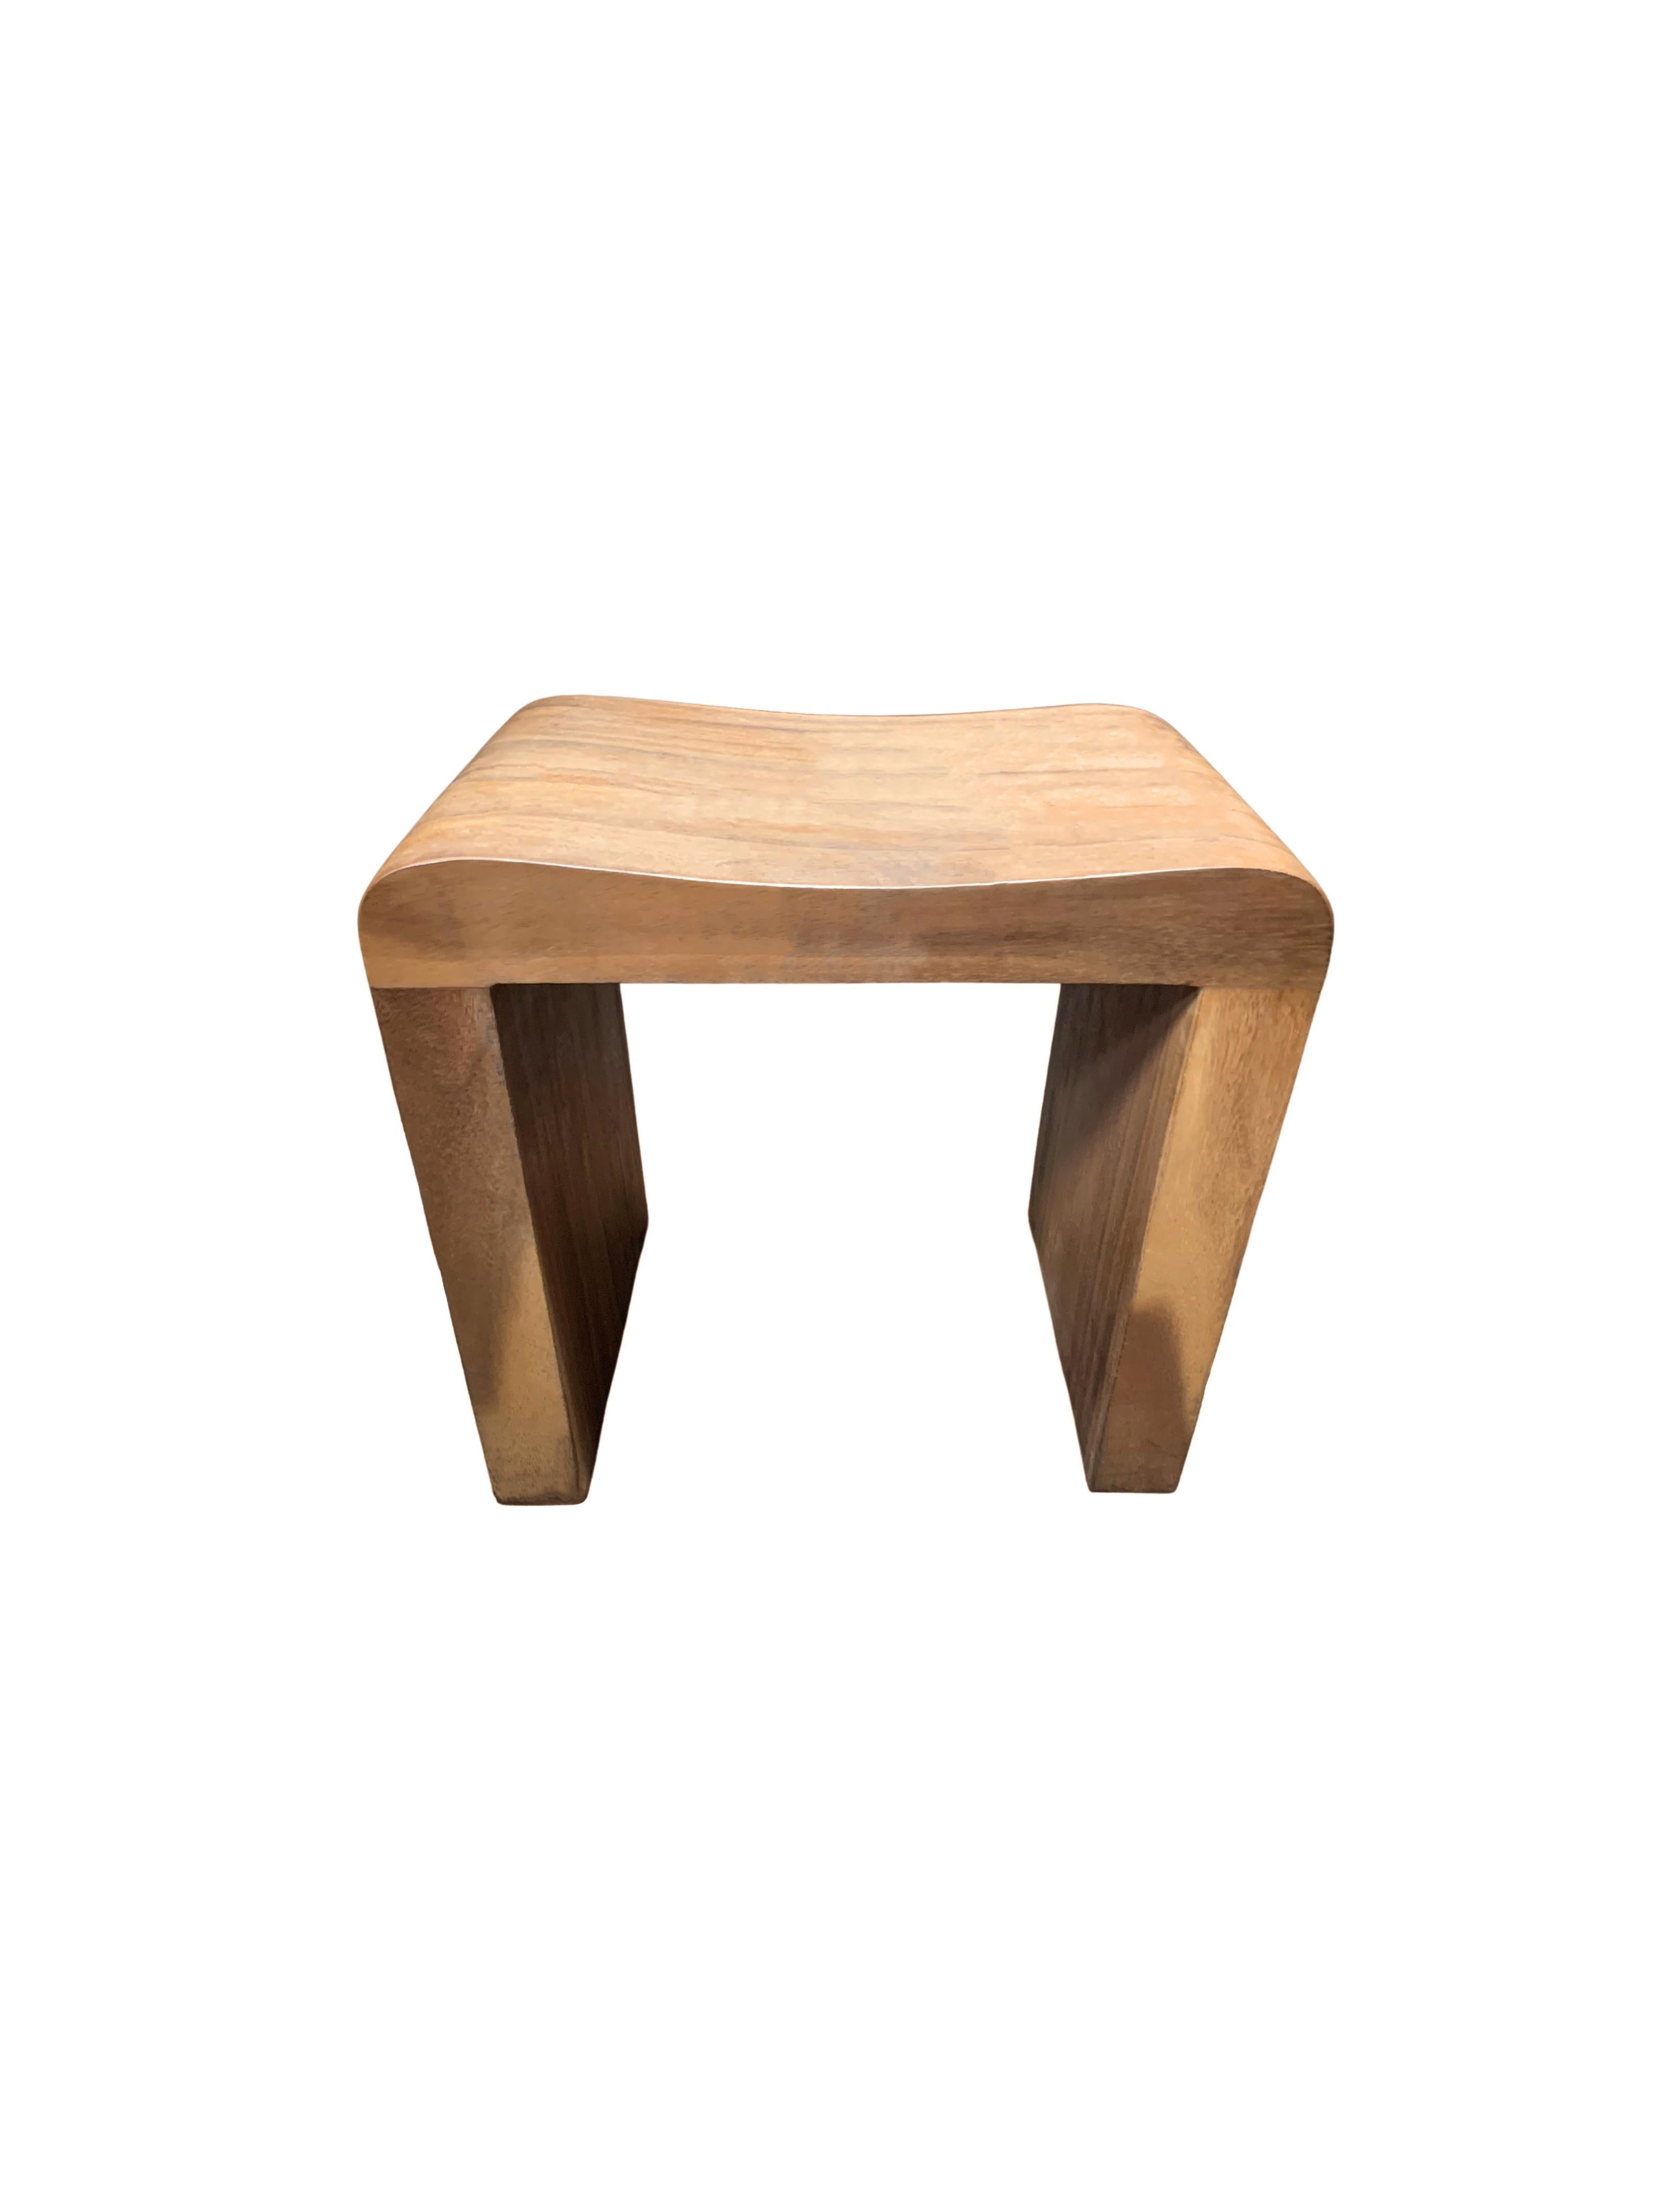 Sculptural Teak Wood Stool In New Condition For Sale In Jimbaran, Bali